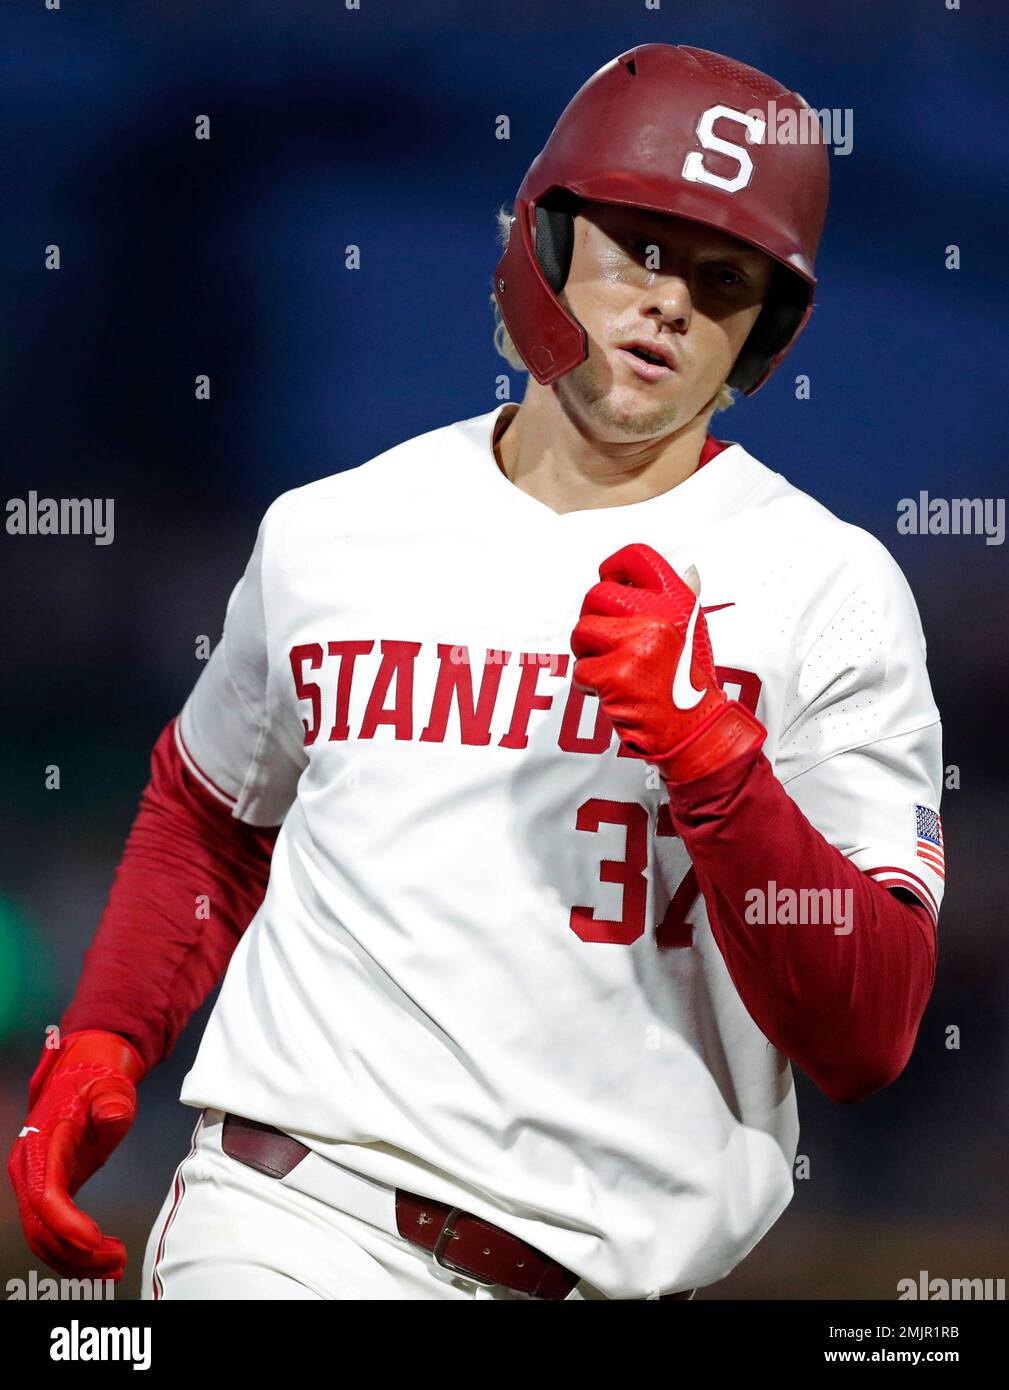 Stanford's Kyle Stowers (37) rounds third base after hitting a